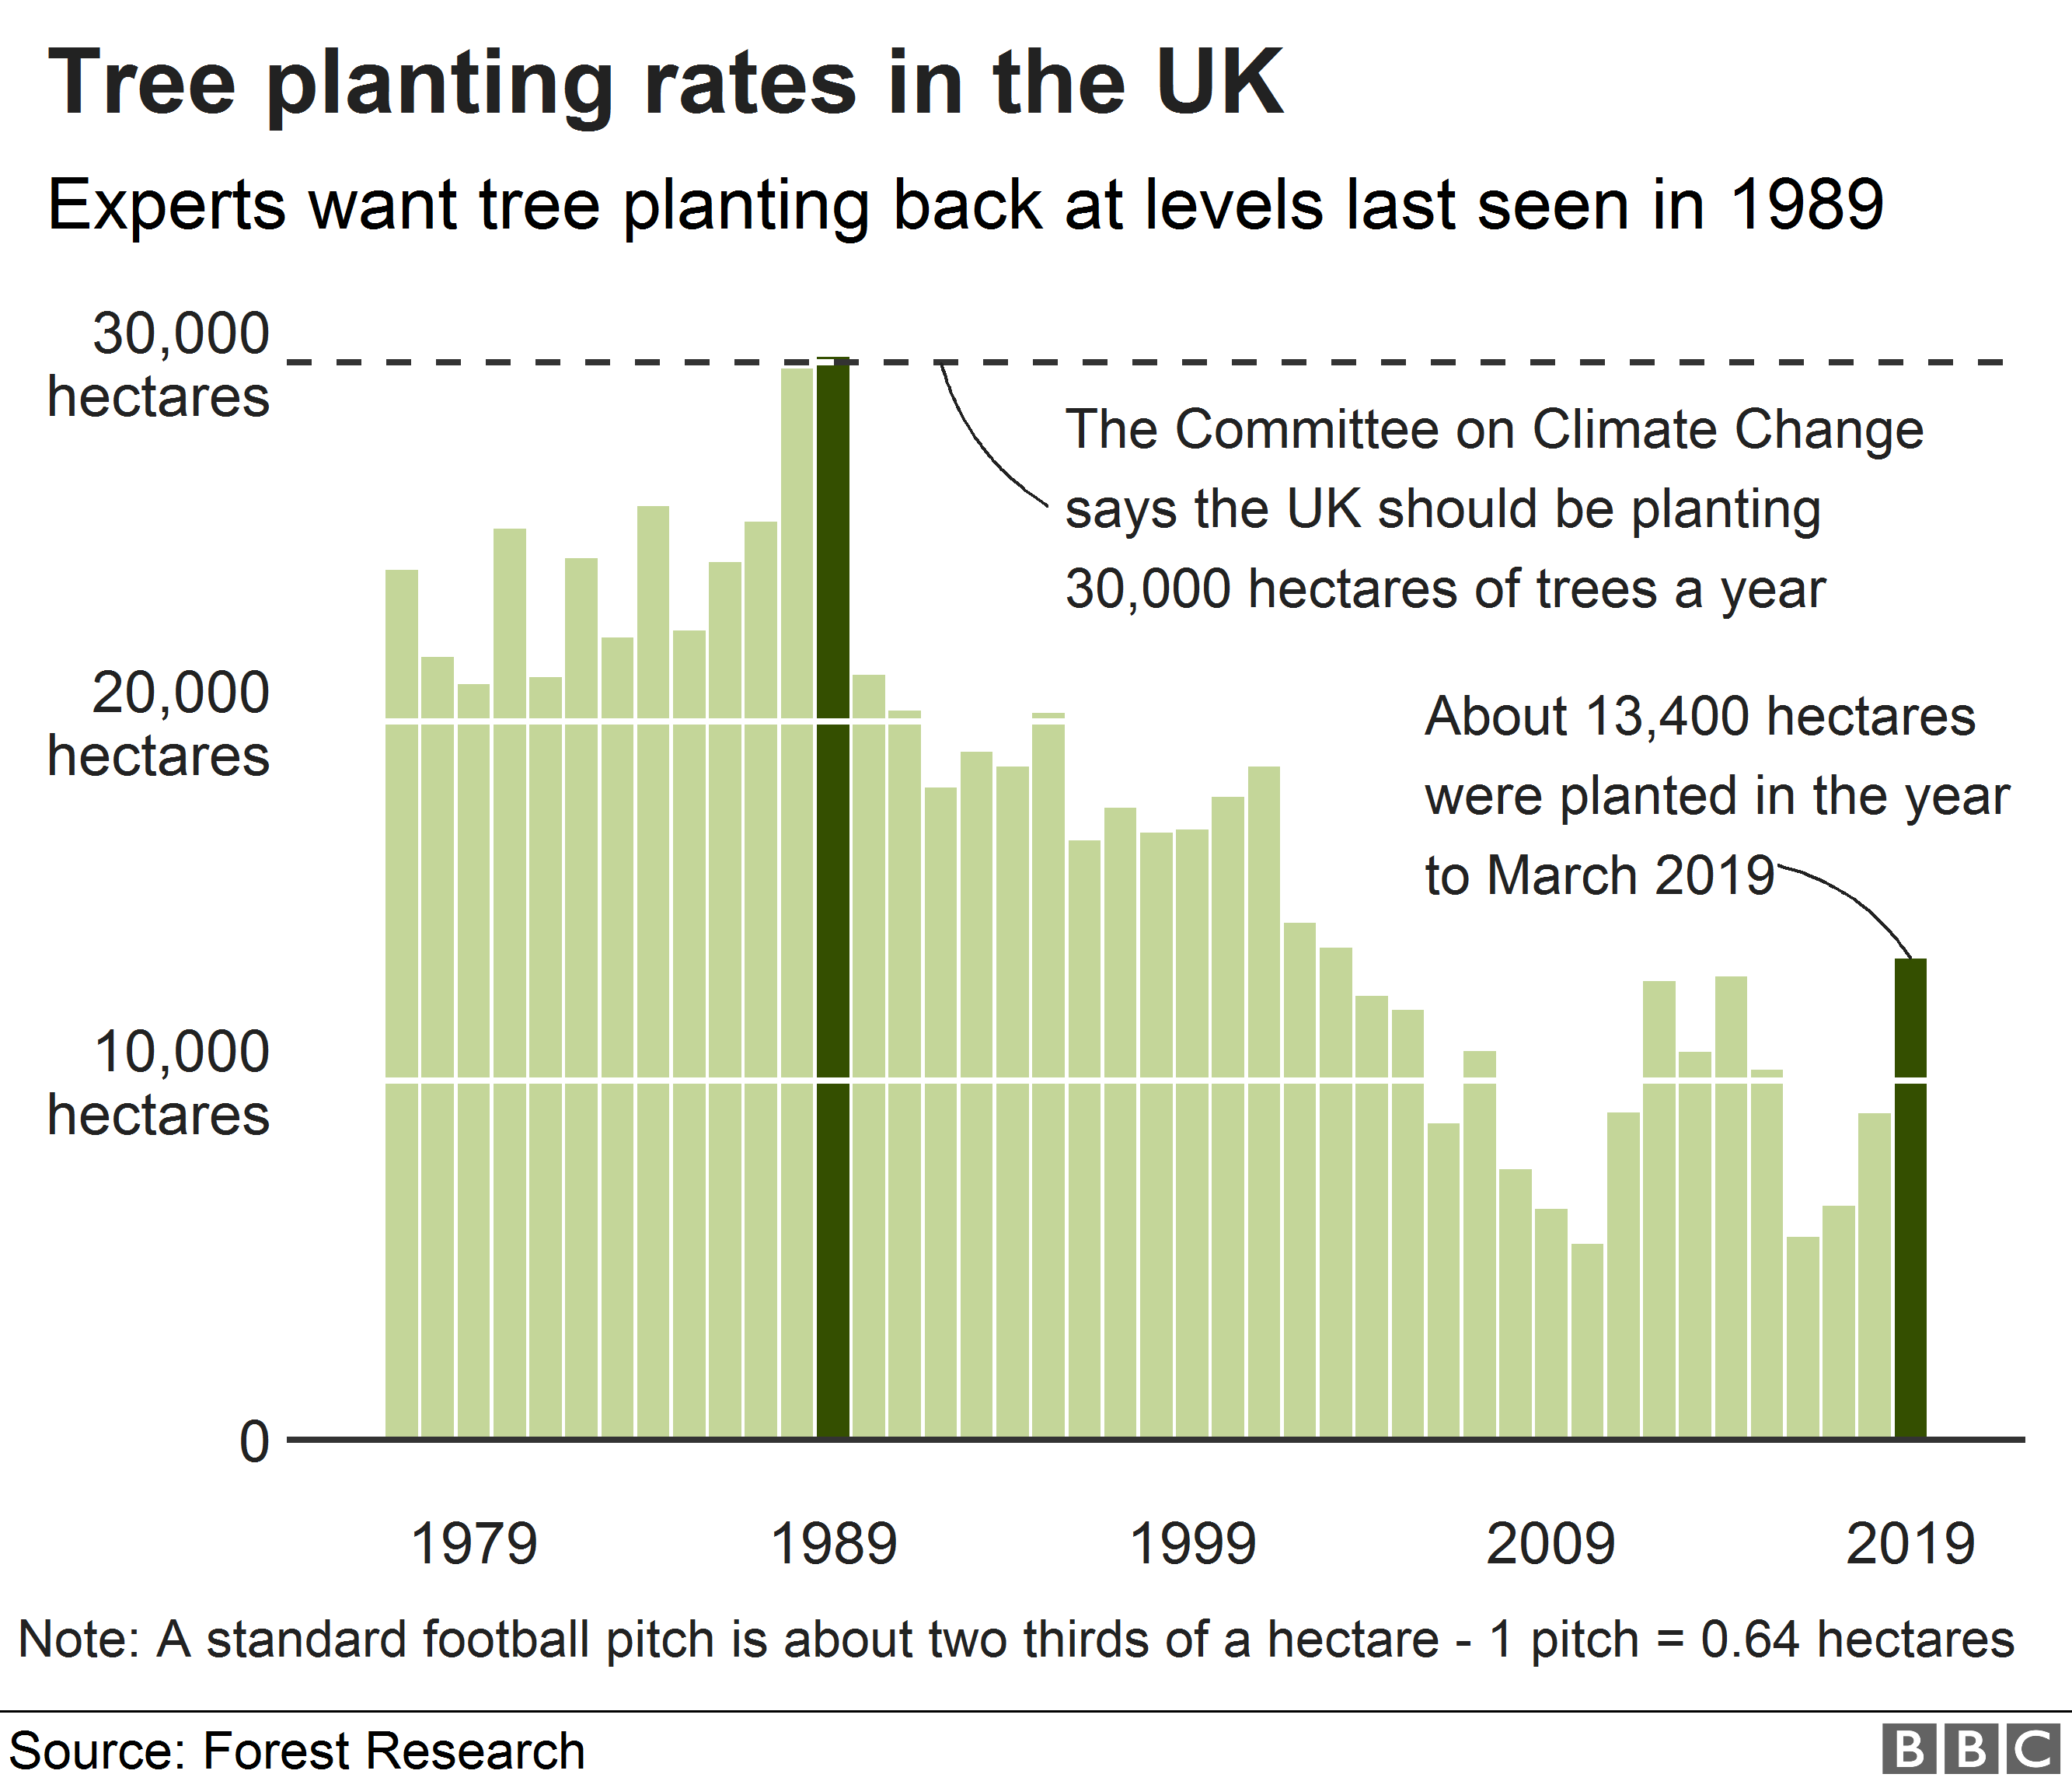 Chart showing planting rates in the UK